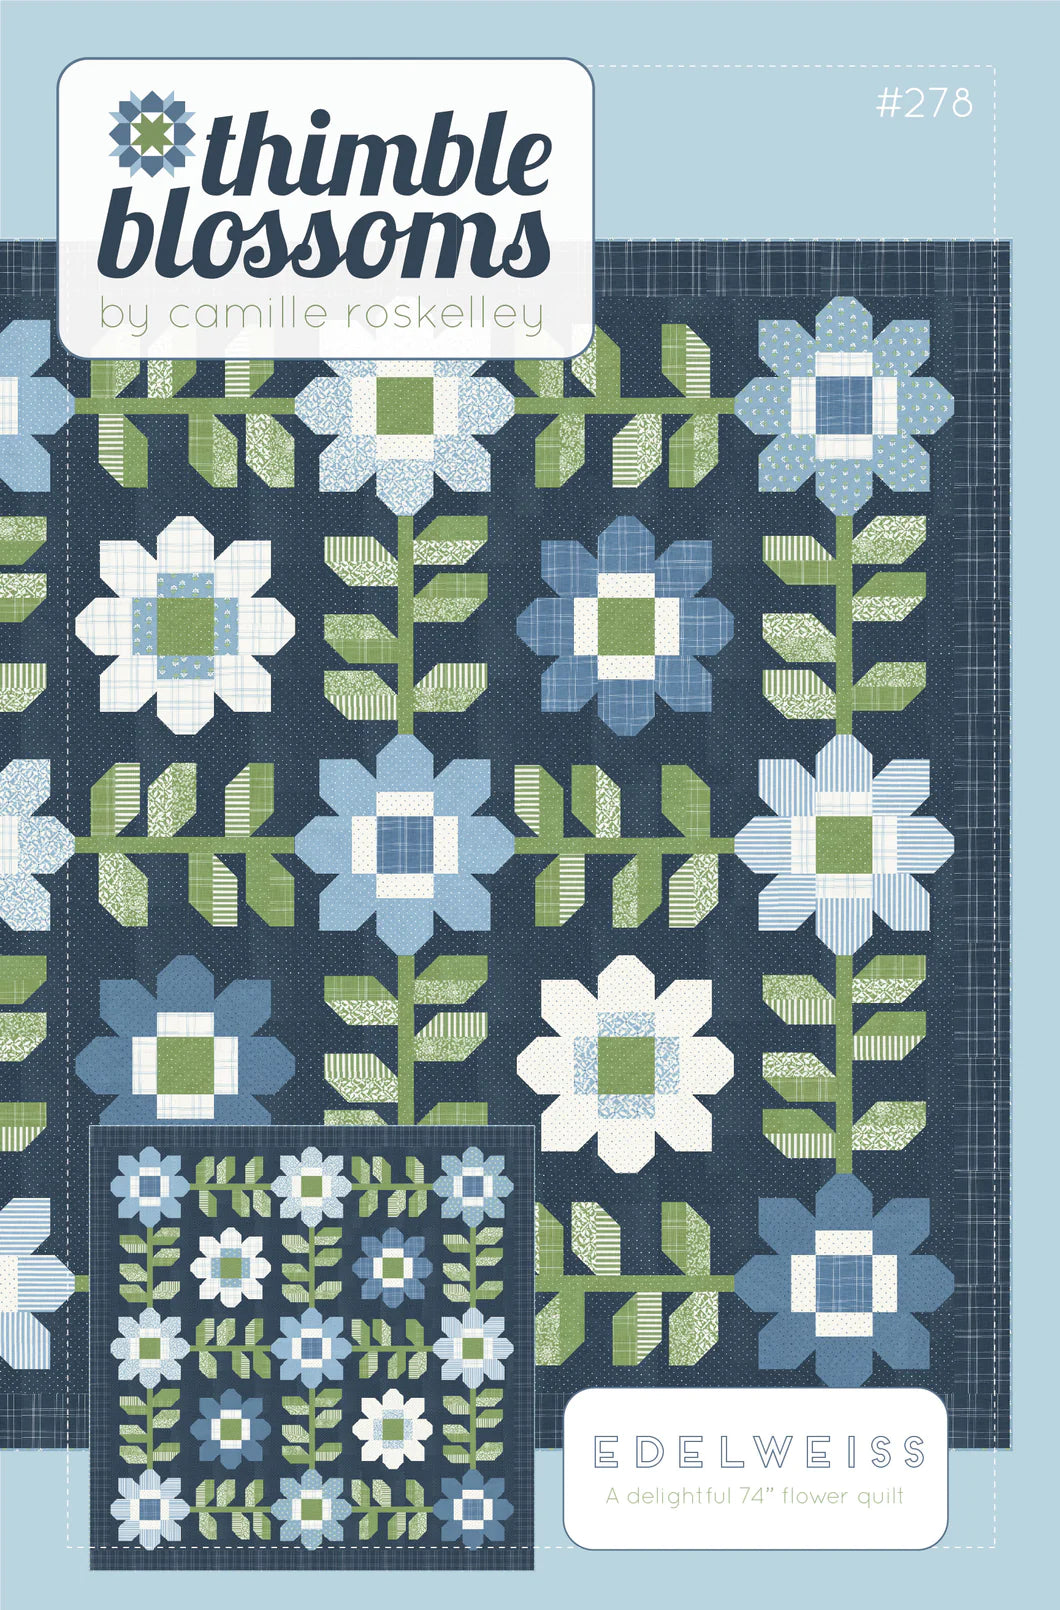 Edelweiss Quilt Pattern - Camille Rosskelley for Thimble Blossoms